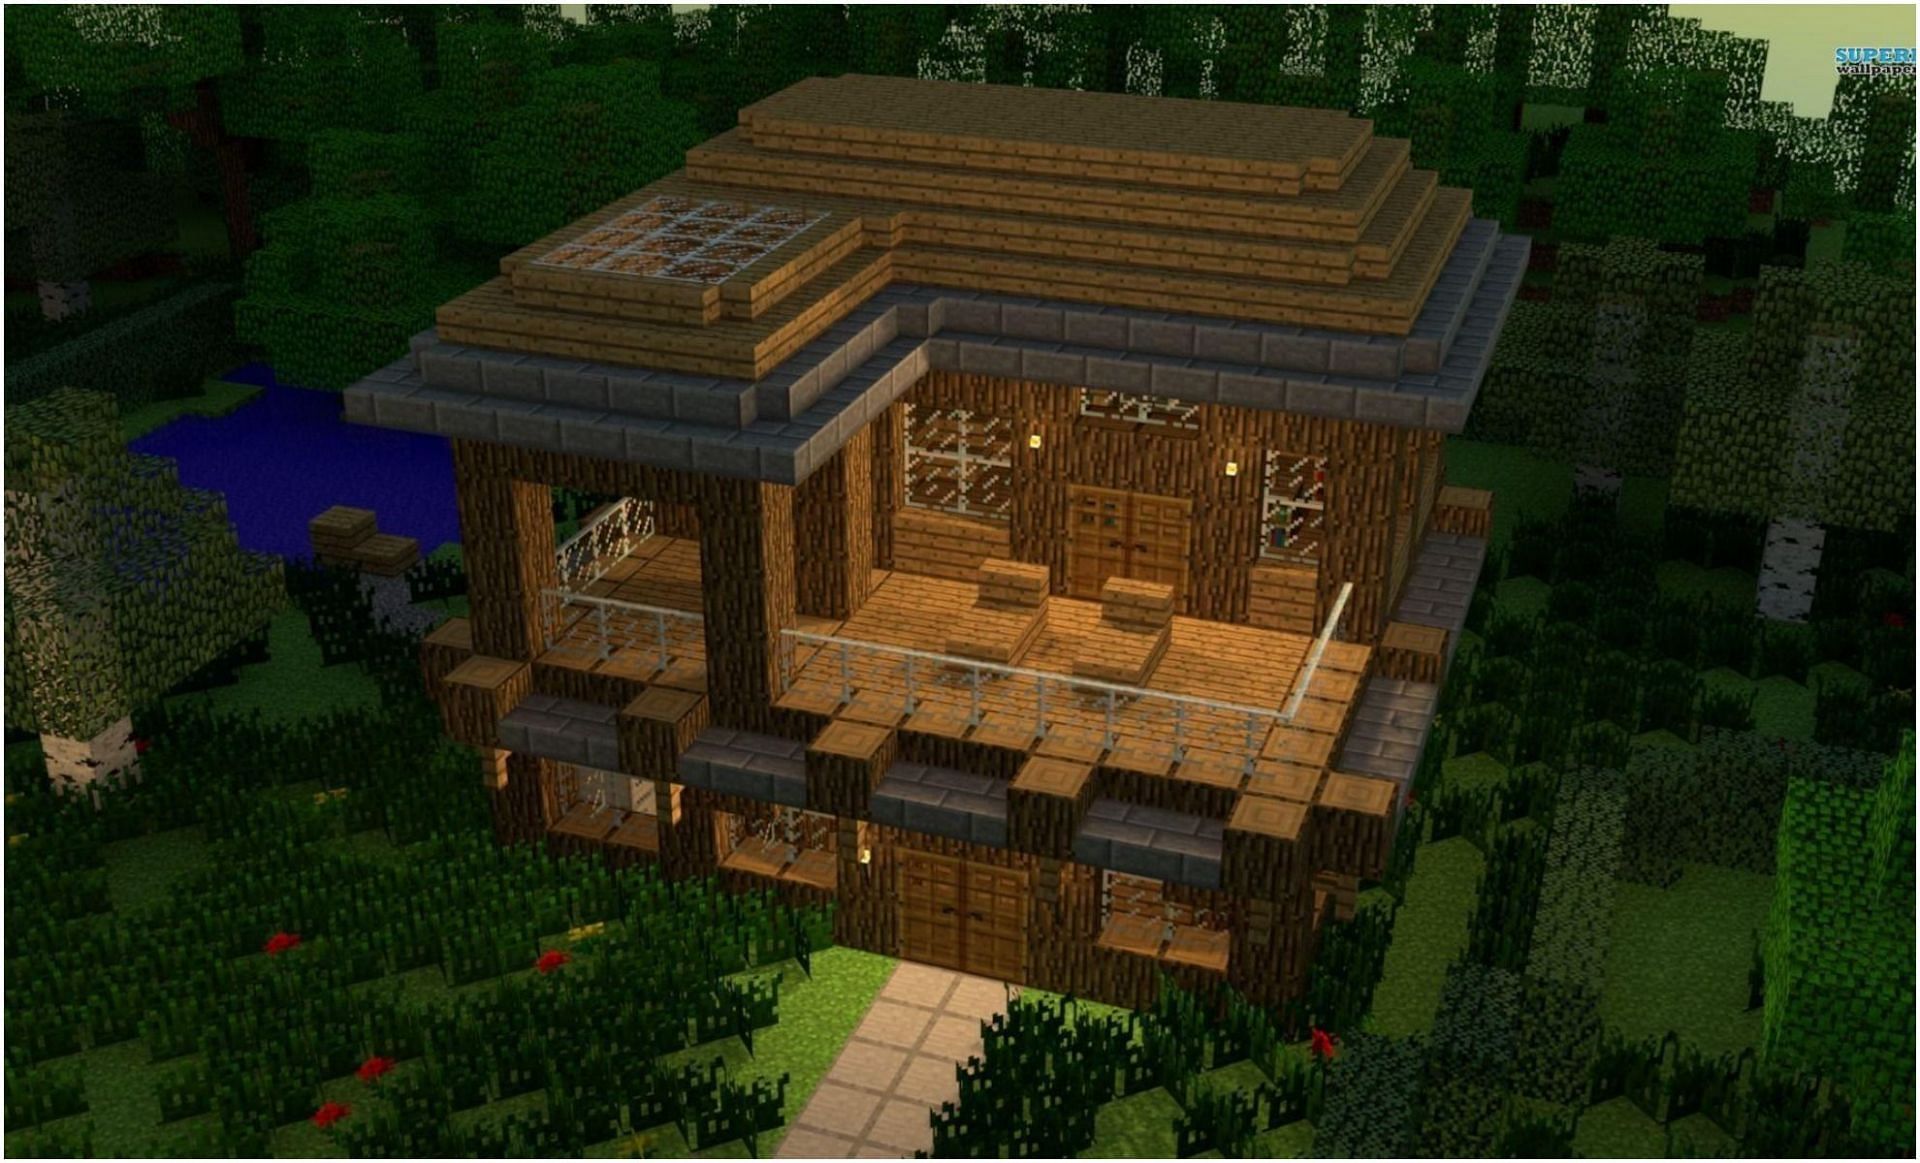 Building a base is necessary in Minecraft (Image via WallpaperCaveMinecraft)